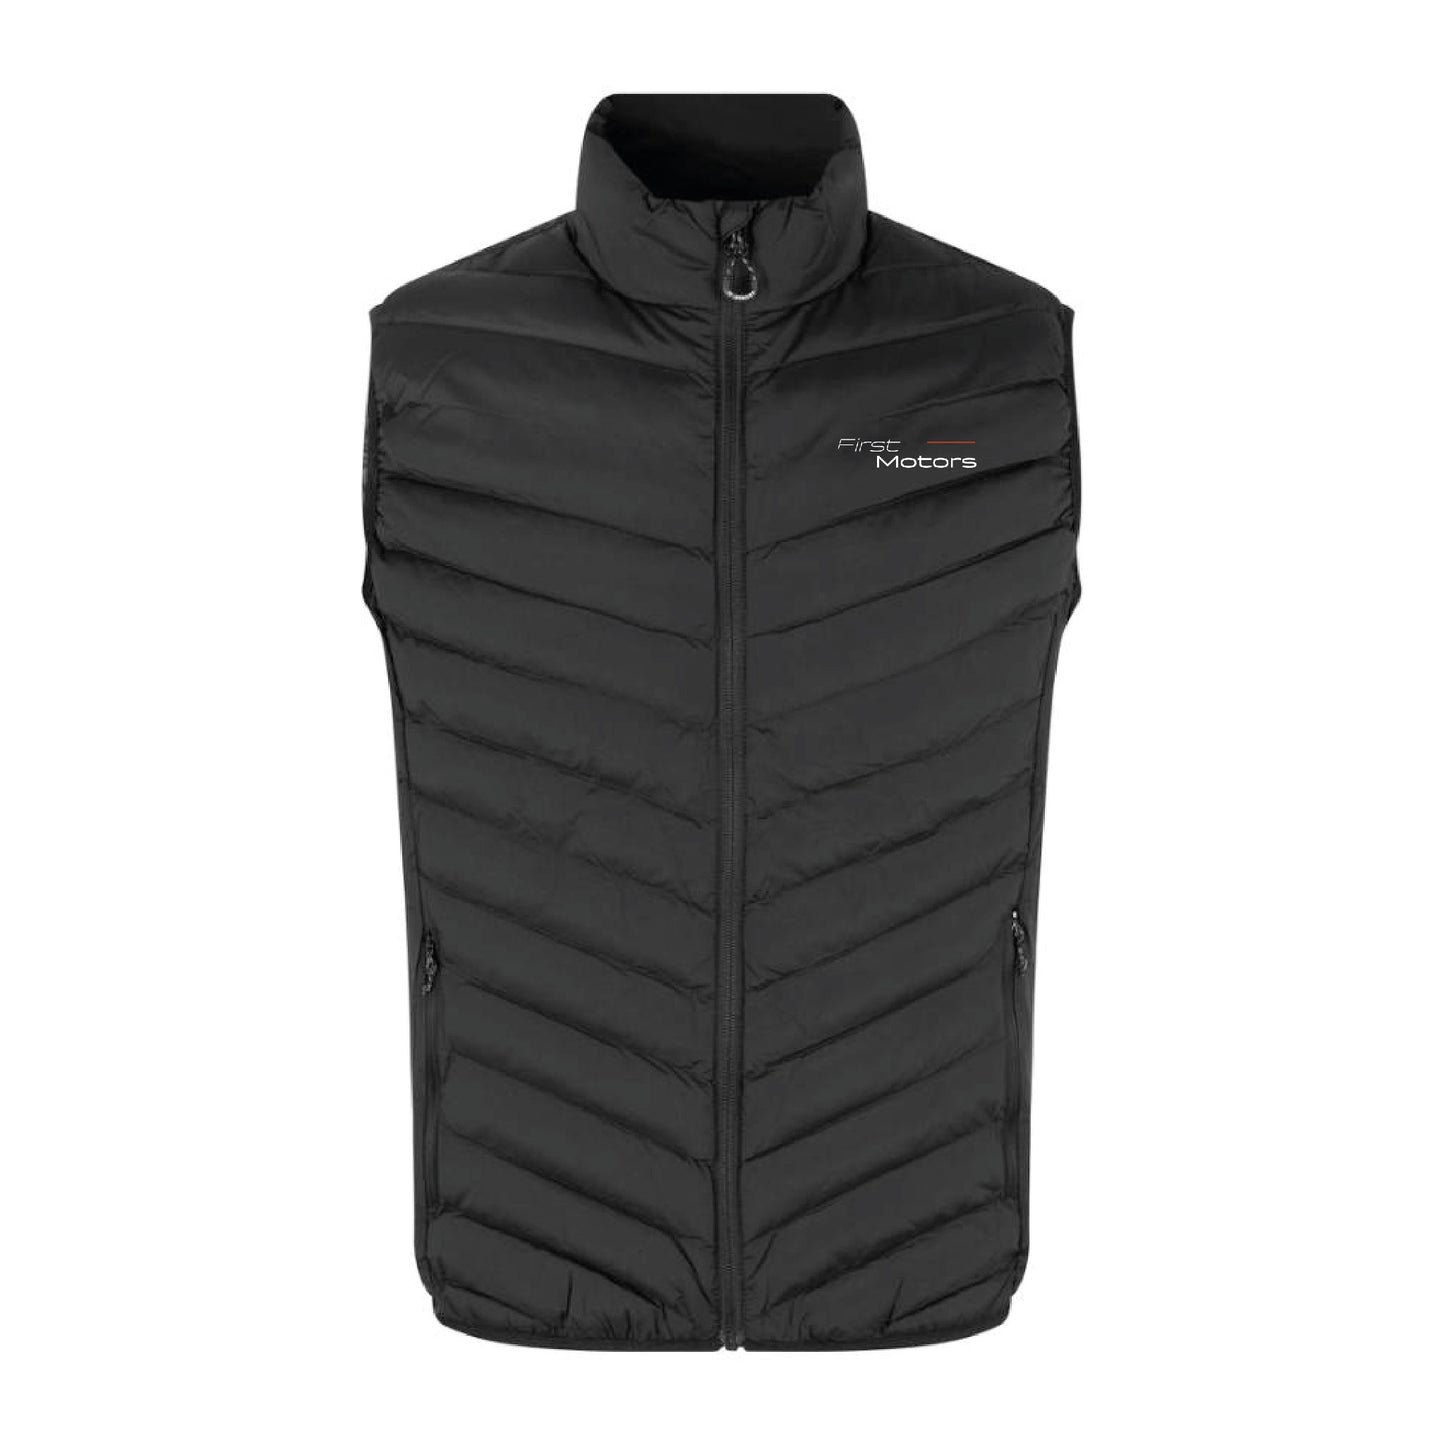 Gilet - Bodywarmer Stretch - Adultes - First Motors (Broderie-ID0892)